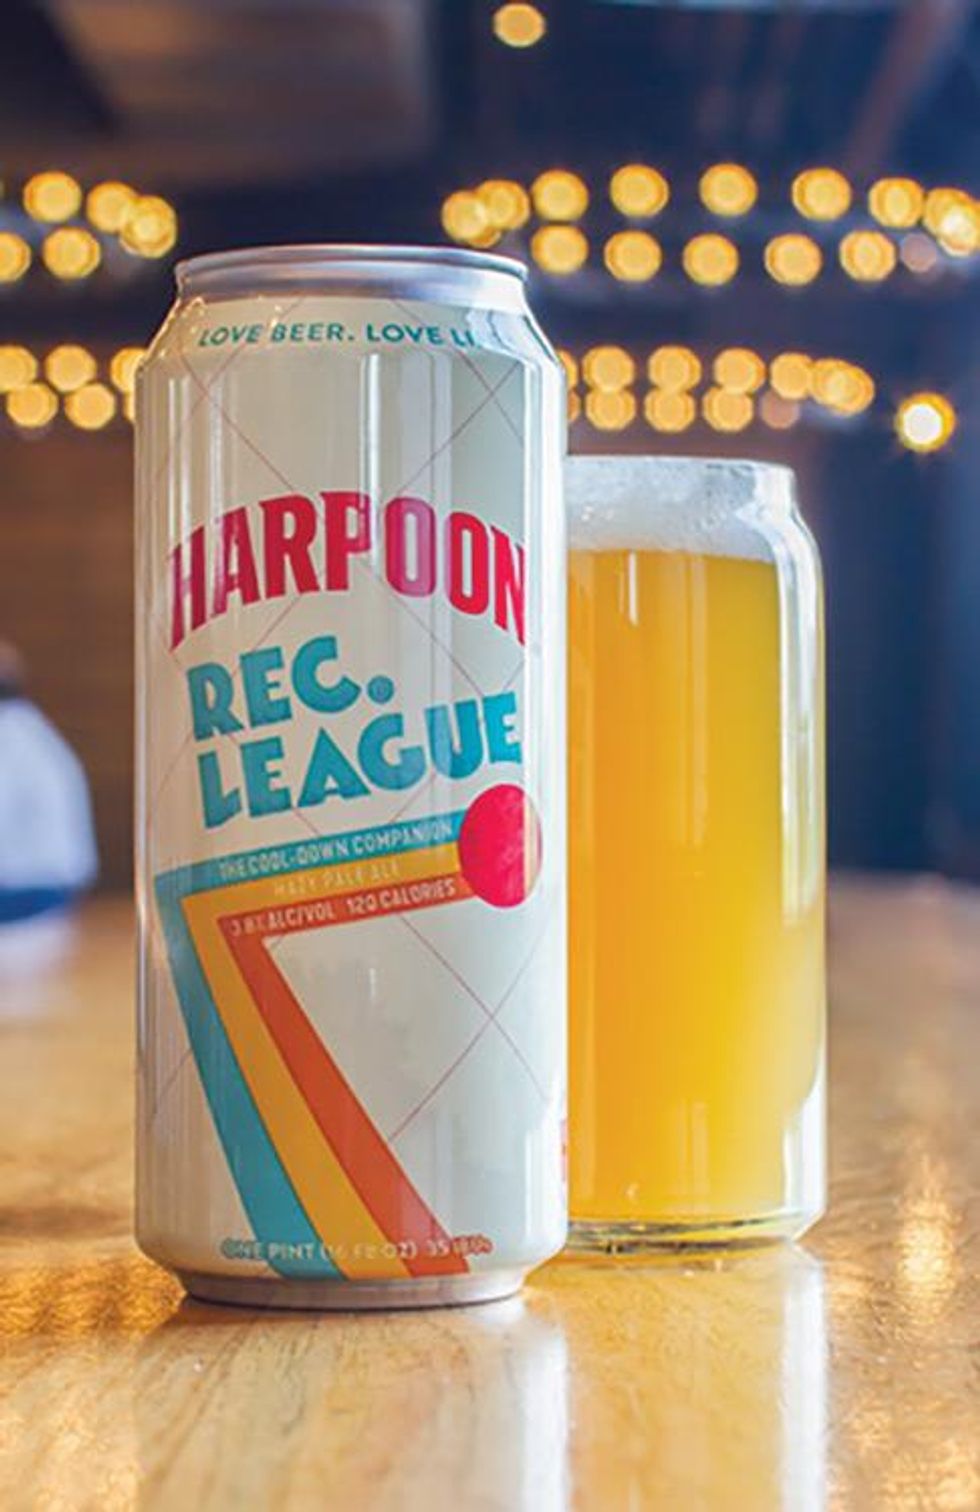 Harpoon Rec. League Beer is brewed with buckwheat, chia seeds, and sea salt so drink with impunity (prices vary HarpoonBrewery.com)